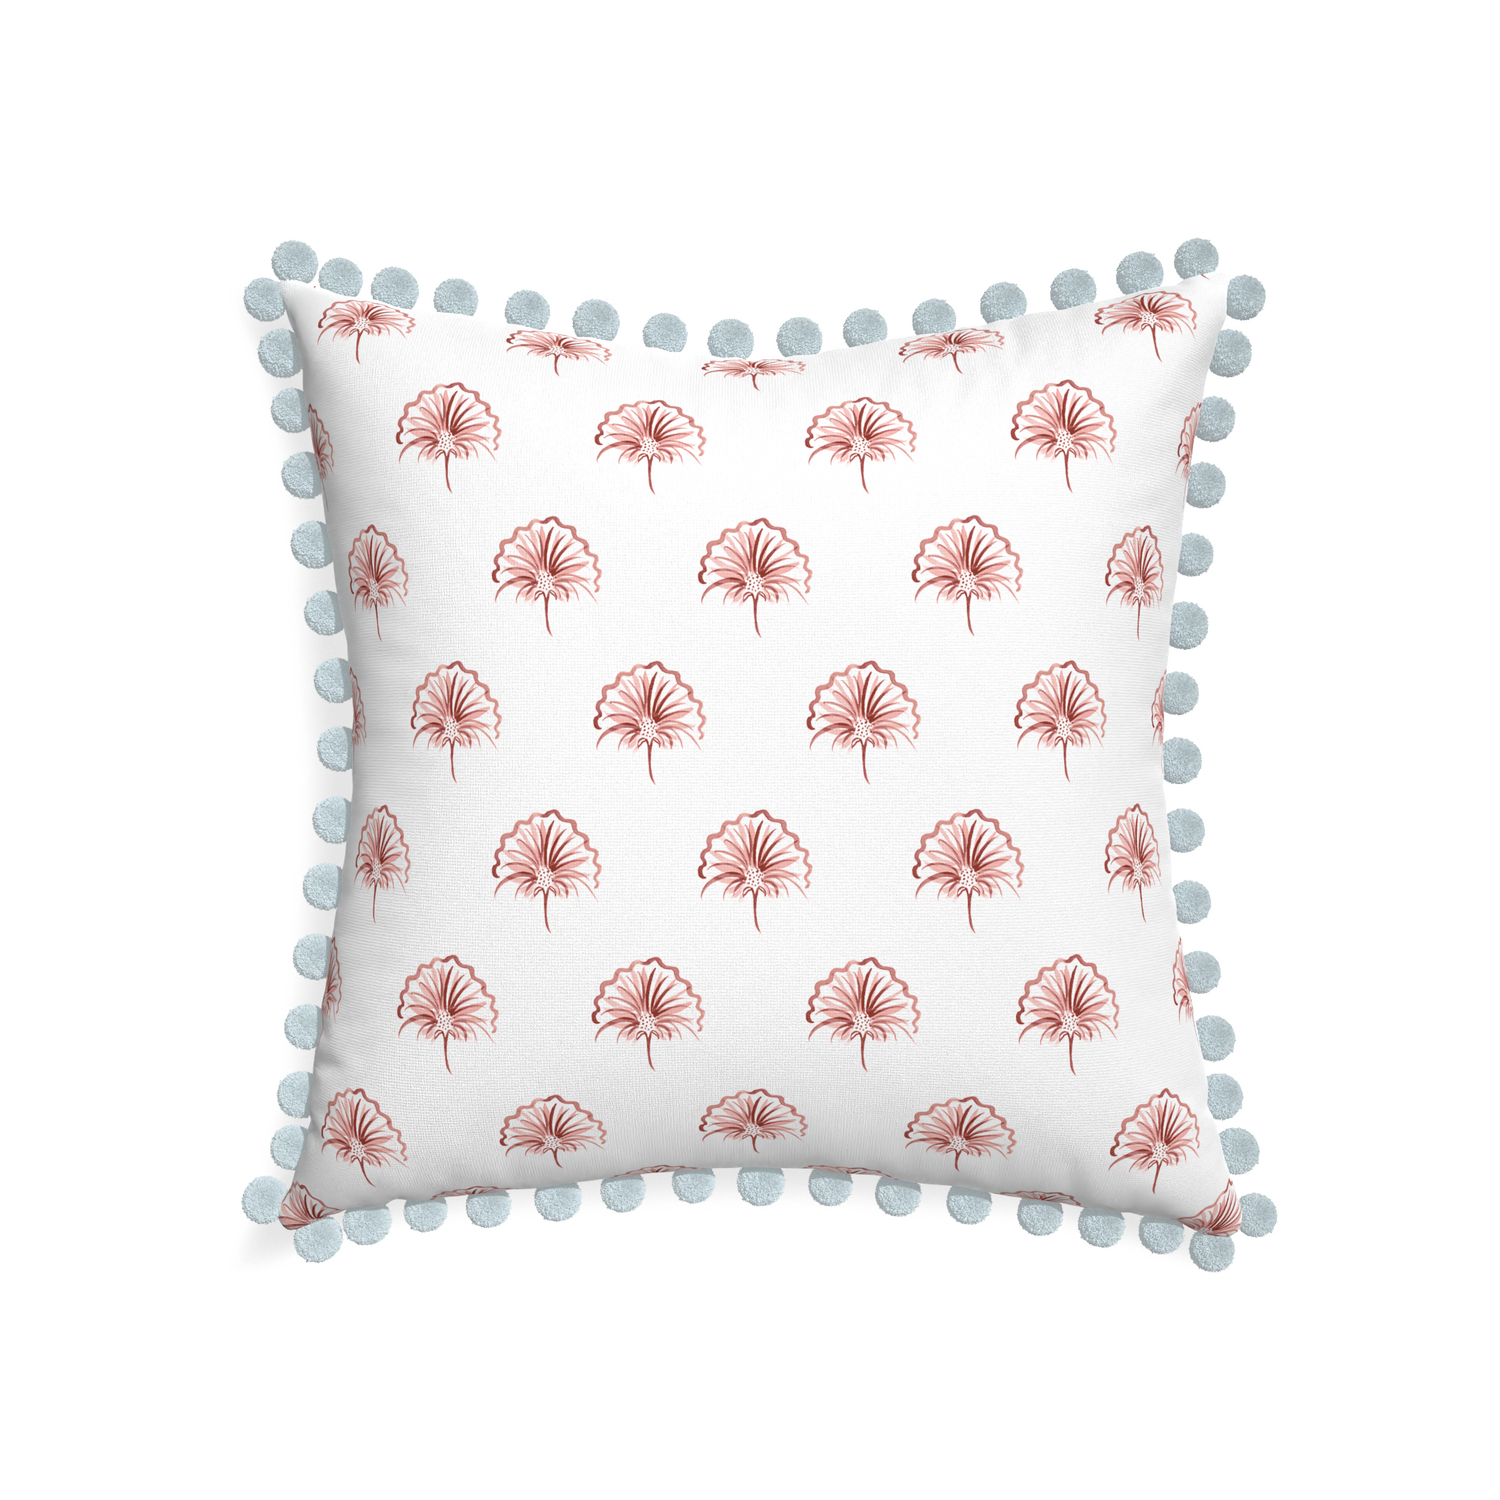 22-square penelope rose custom floral pinkpillow with powder pom pom on white background